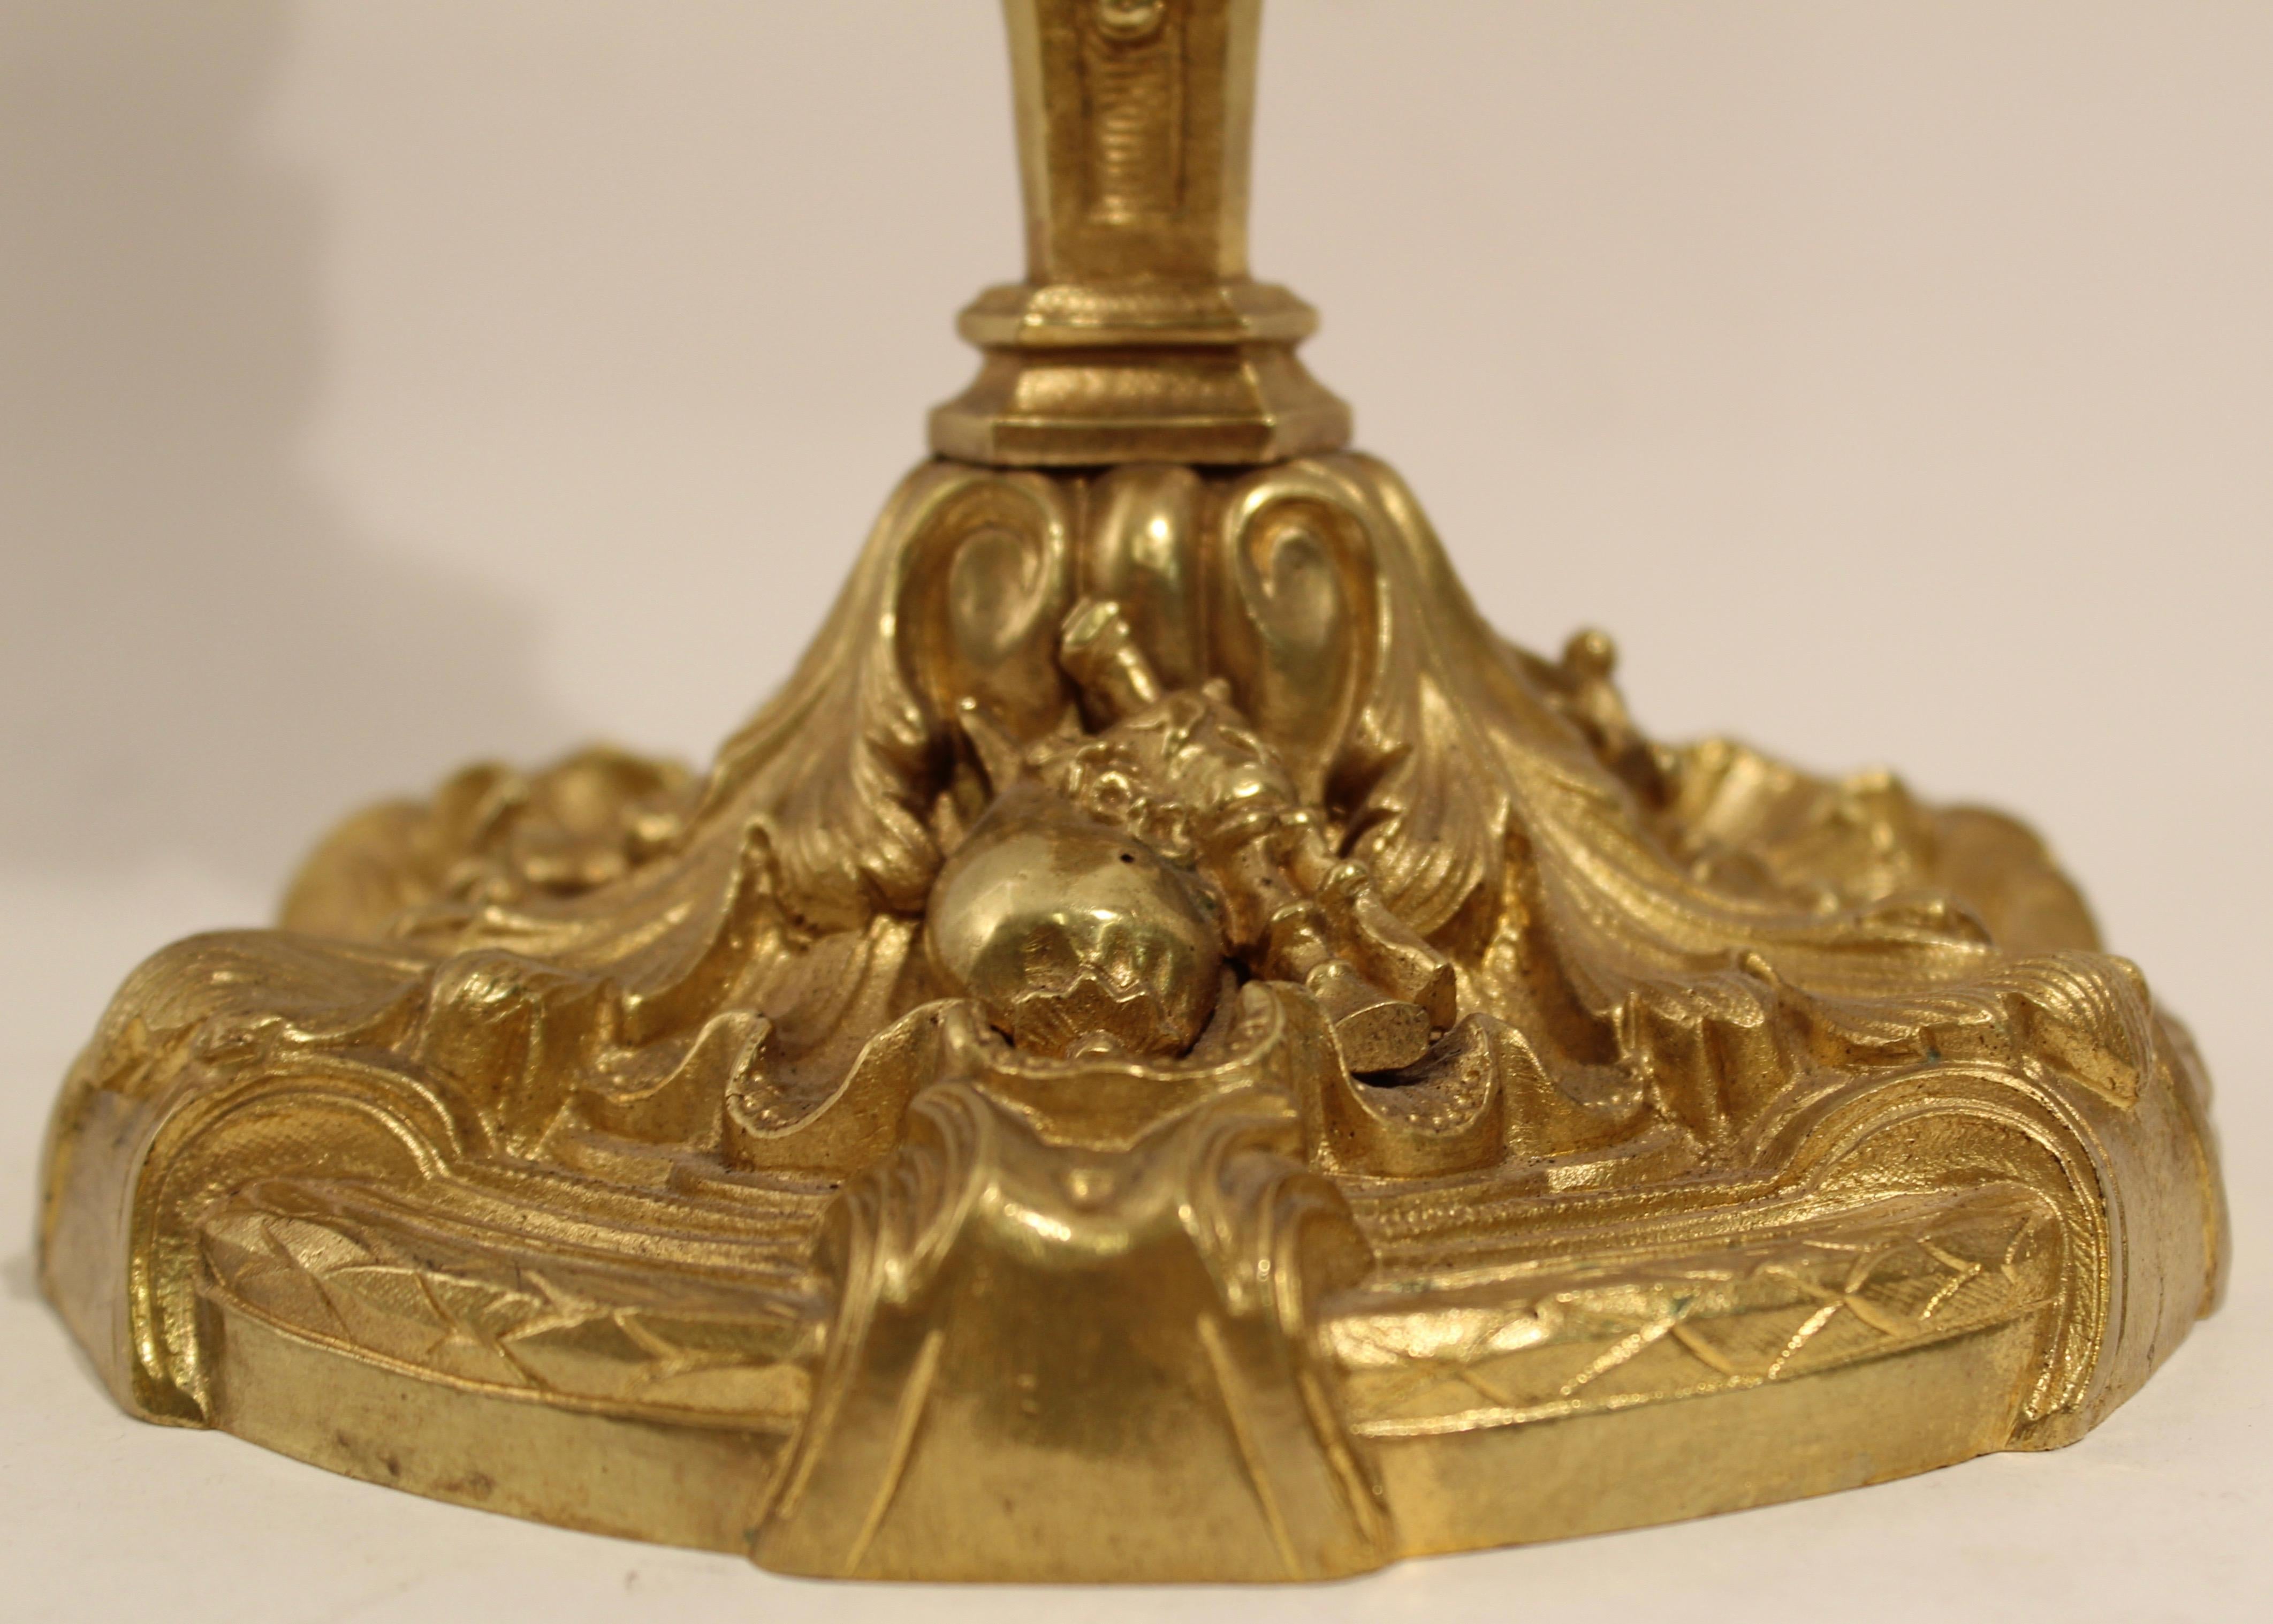 Pair of French Louis XIV style candlesticks, circa 1850. The circular foliate ormolu base decorated with instruments, below a triform column with faces of court jesters and fauns, above this, an urn shaped candleholder.
 